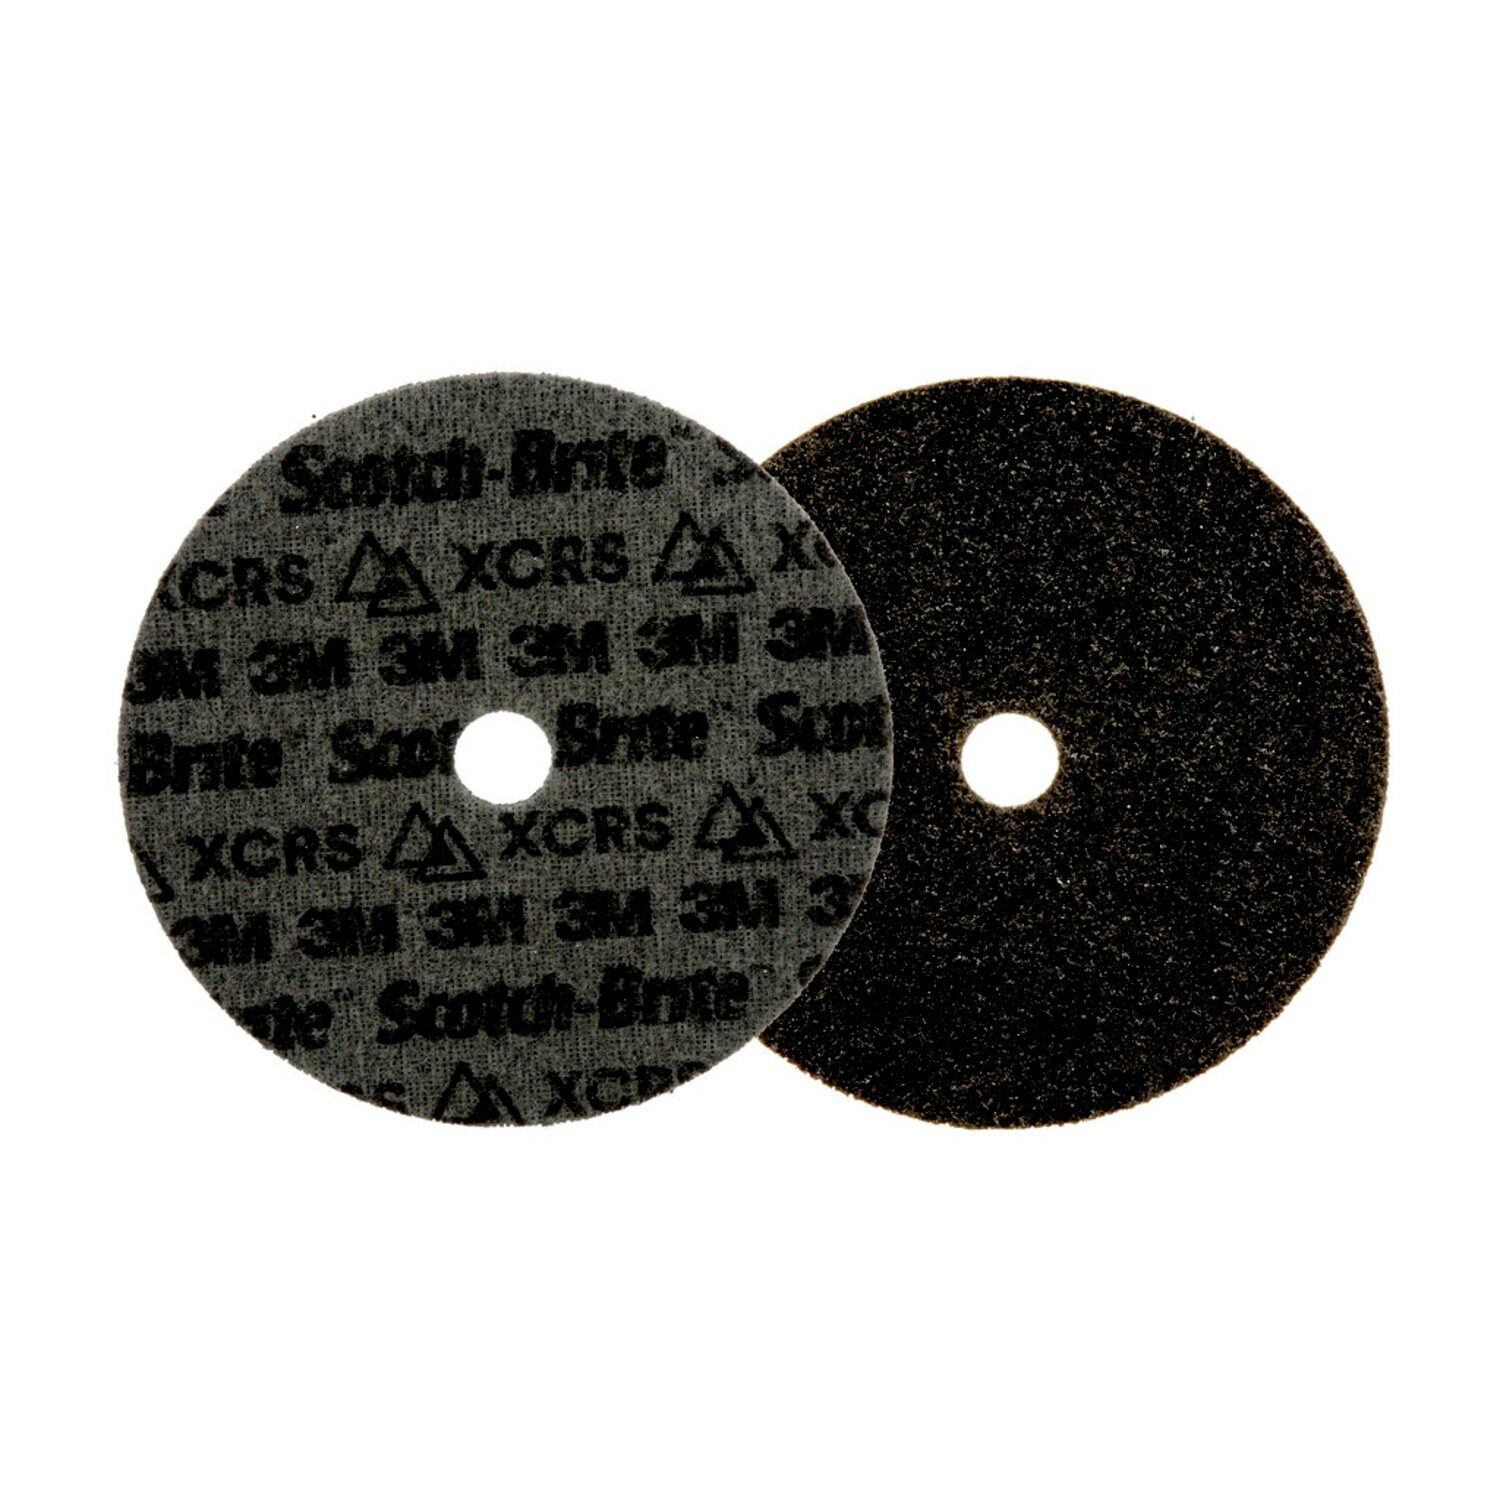 7100271025 - Scotch-Brite Precision Surface Conditioning Disc, PN-DH, Extra Coarse, 7 in x 7/8 in, 25 ea/Case